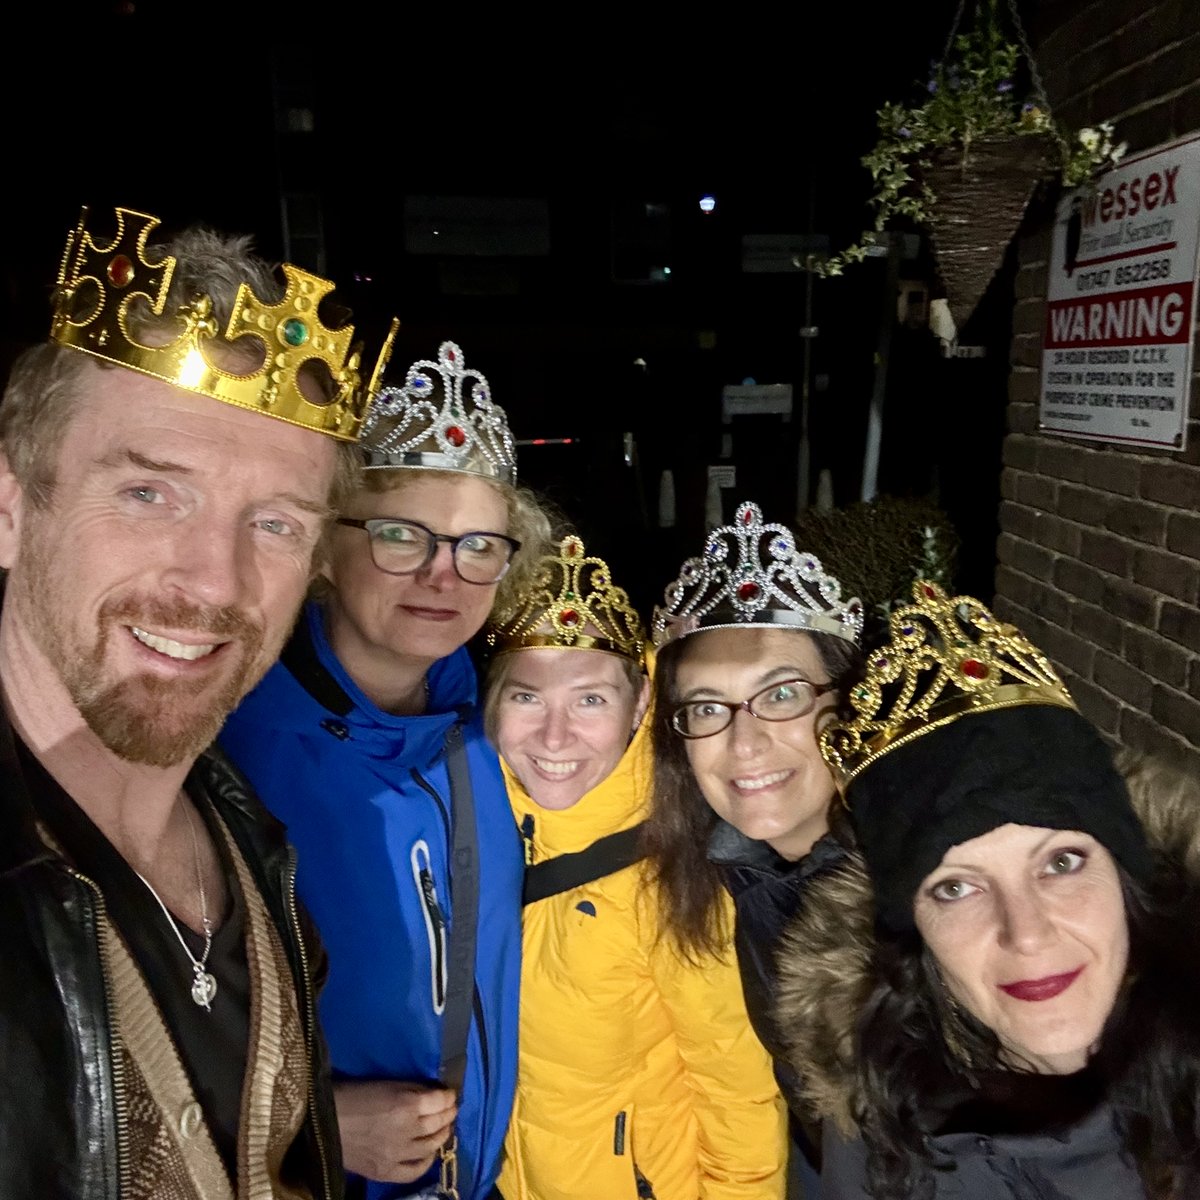 TFW you have a backstage pass on Damian Lewis' UK tour 🎸🤩🔥💕 From a coronation ceremony 👑 to having the band's signature drink 'D Lou' 🍸here's all the BTS fun from the UK Tour: fanfunwithdamianlewis.com/?p=52776 #DamianLewis #MissionCreep #DamianLewisUKTour #DamianLewisMusic